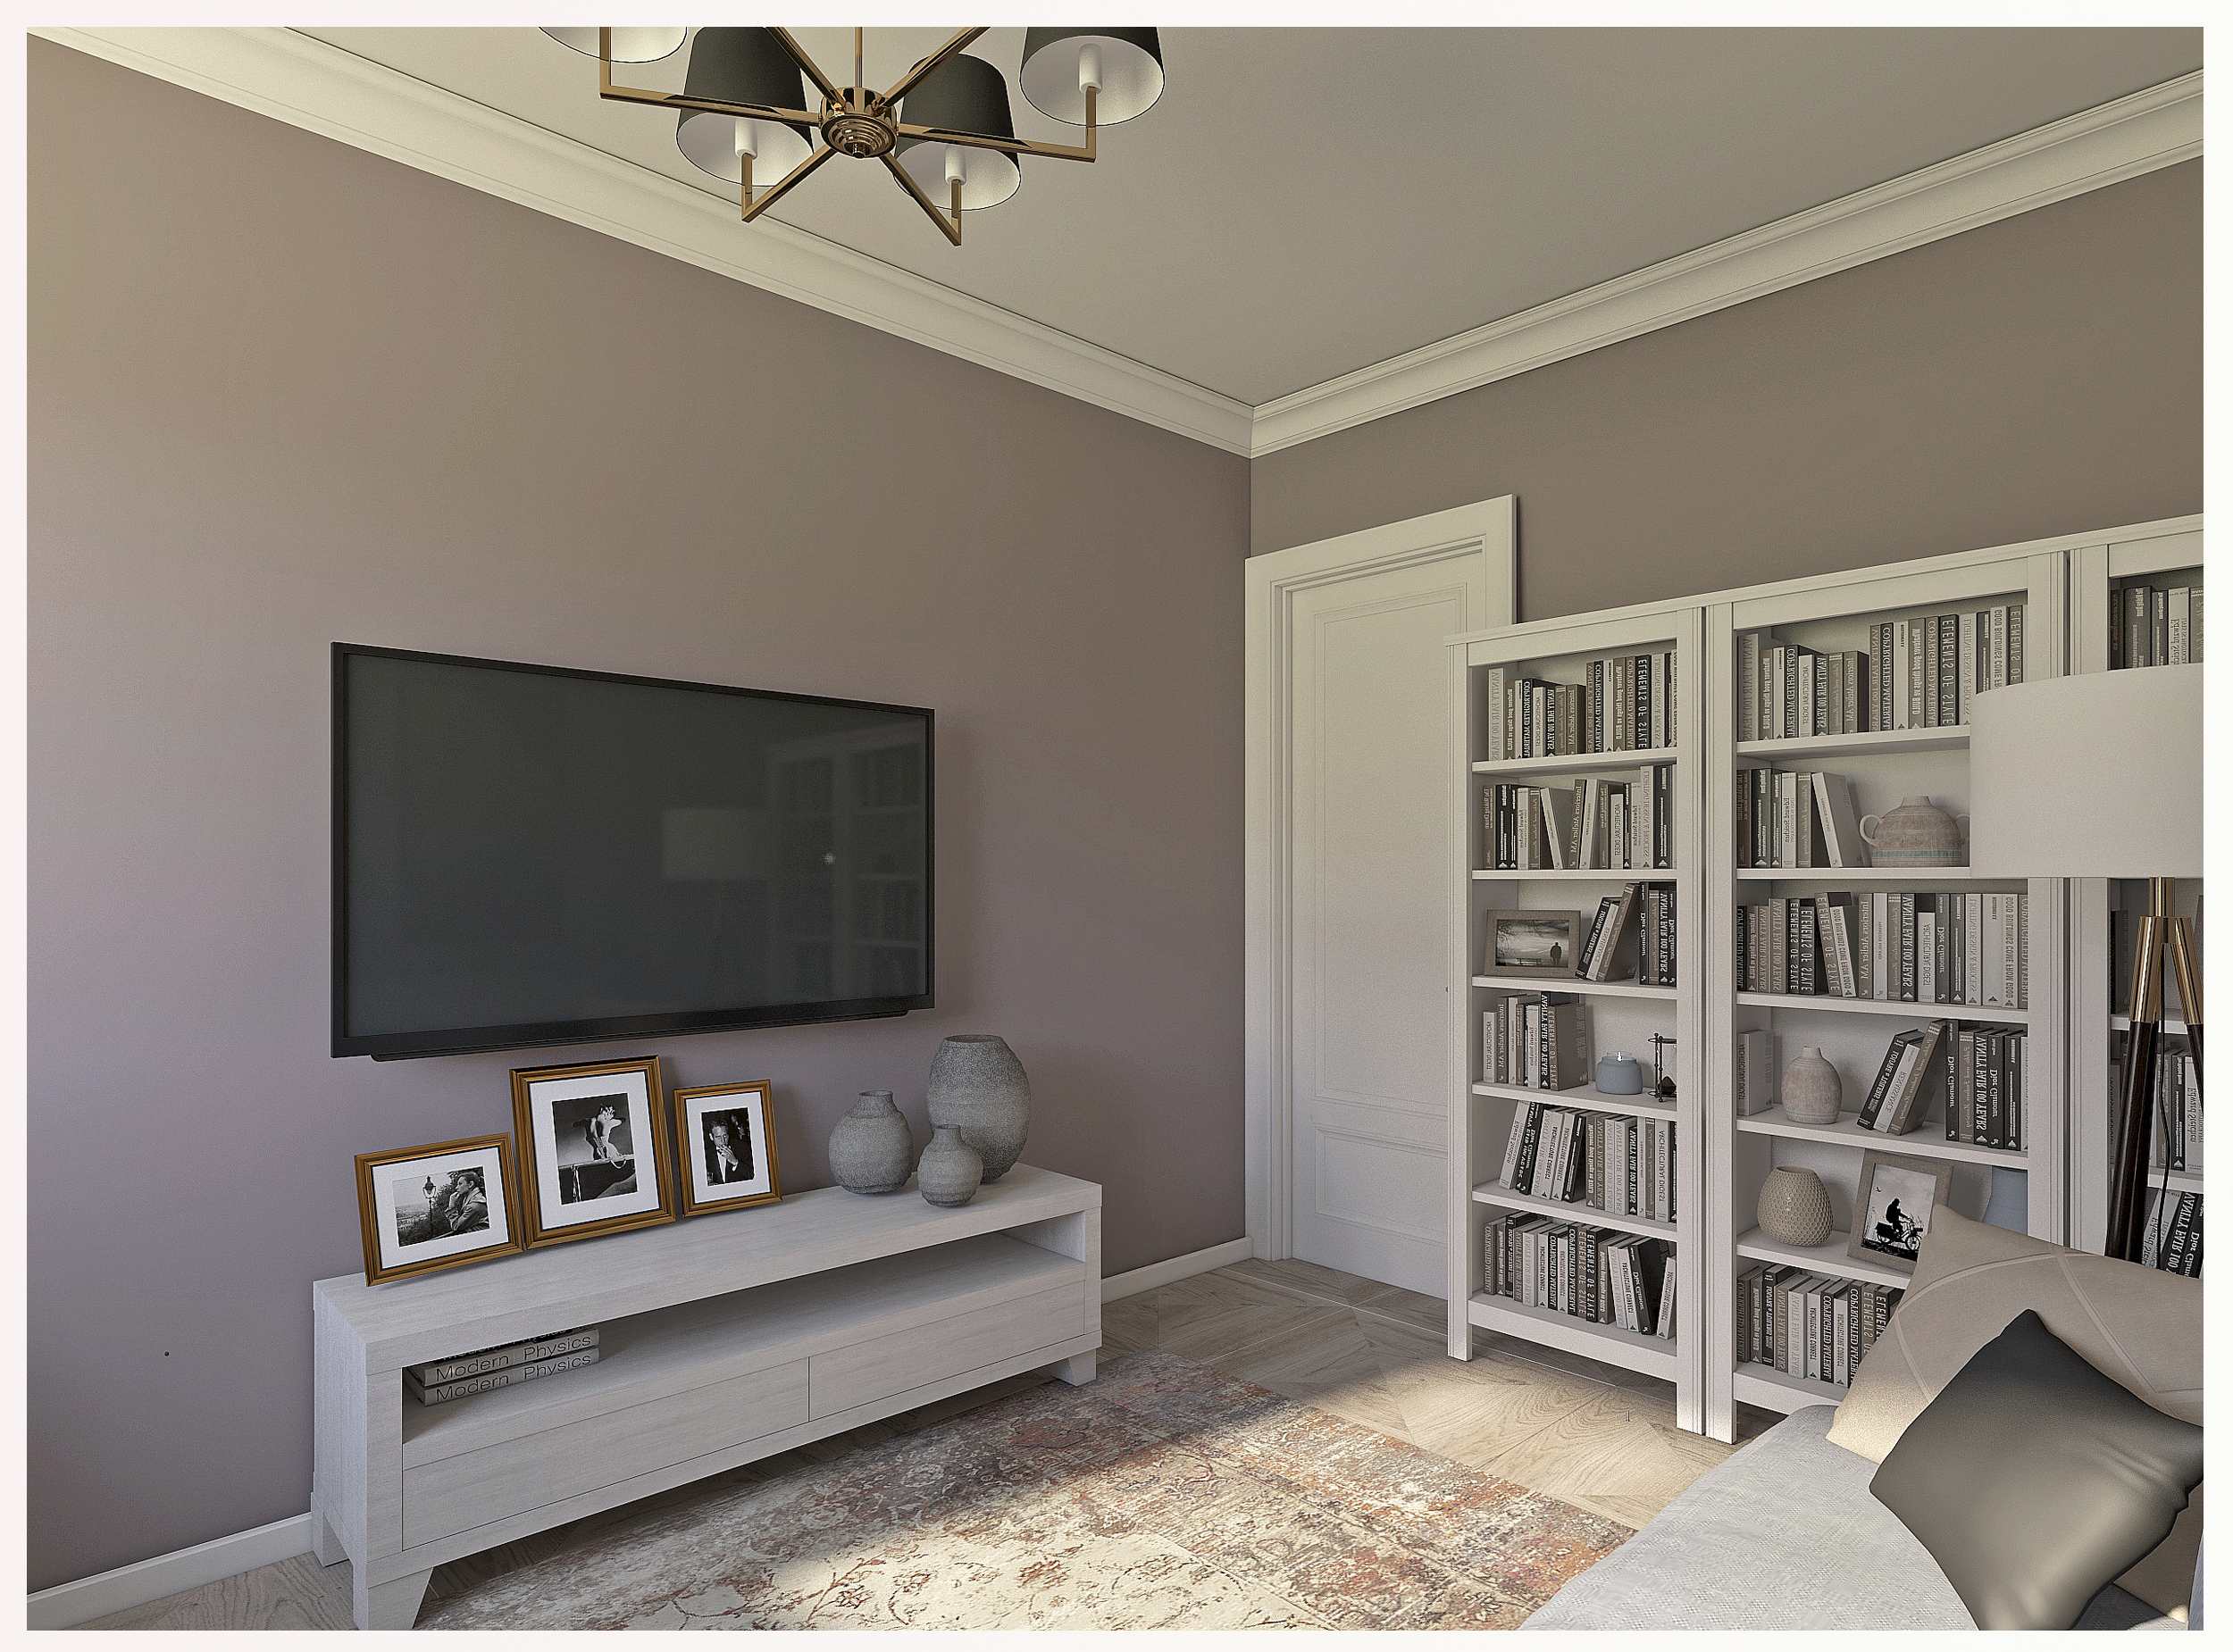 living room in 3d max vray 3.0 image